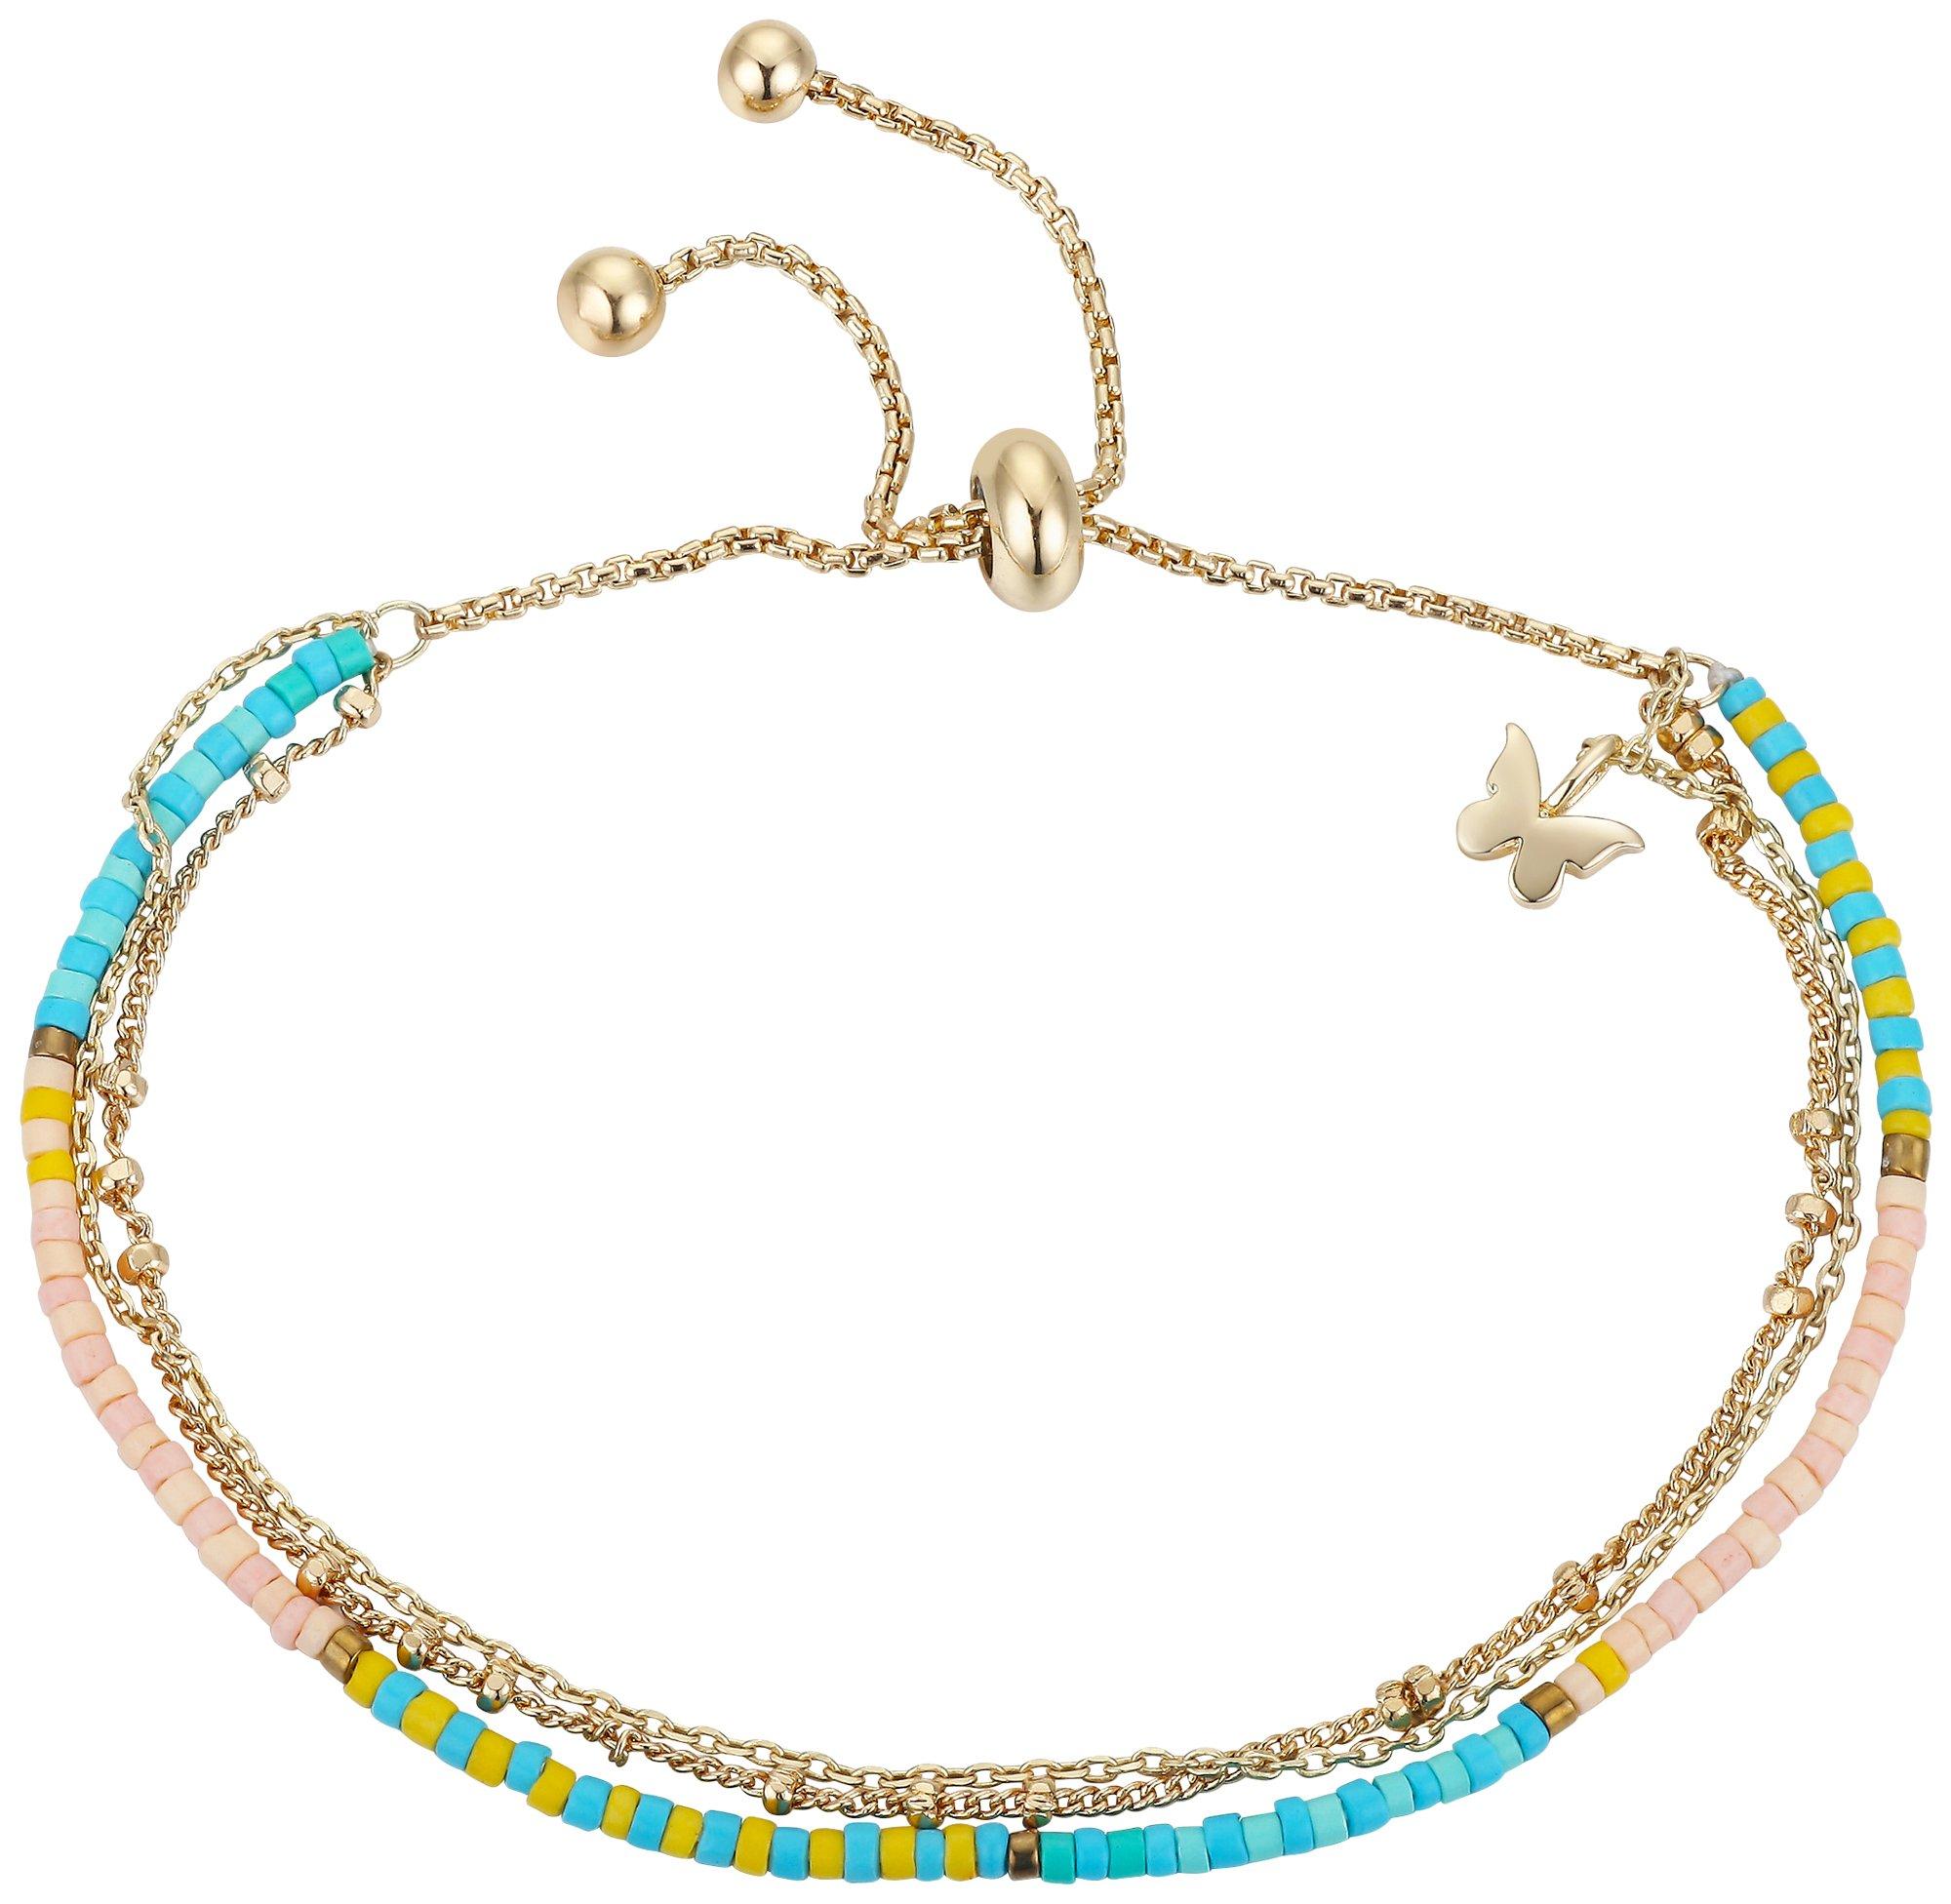 Footnotes 2-Row Cuff & Butterfly Beaded Bracelet